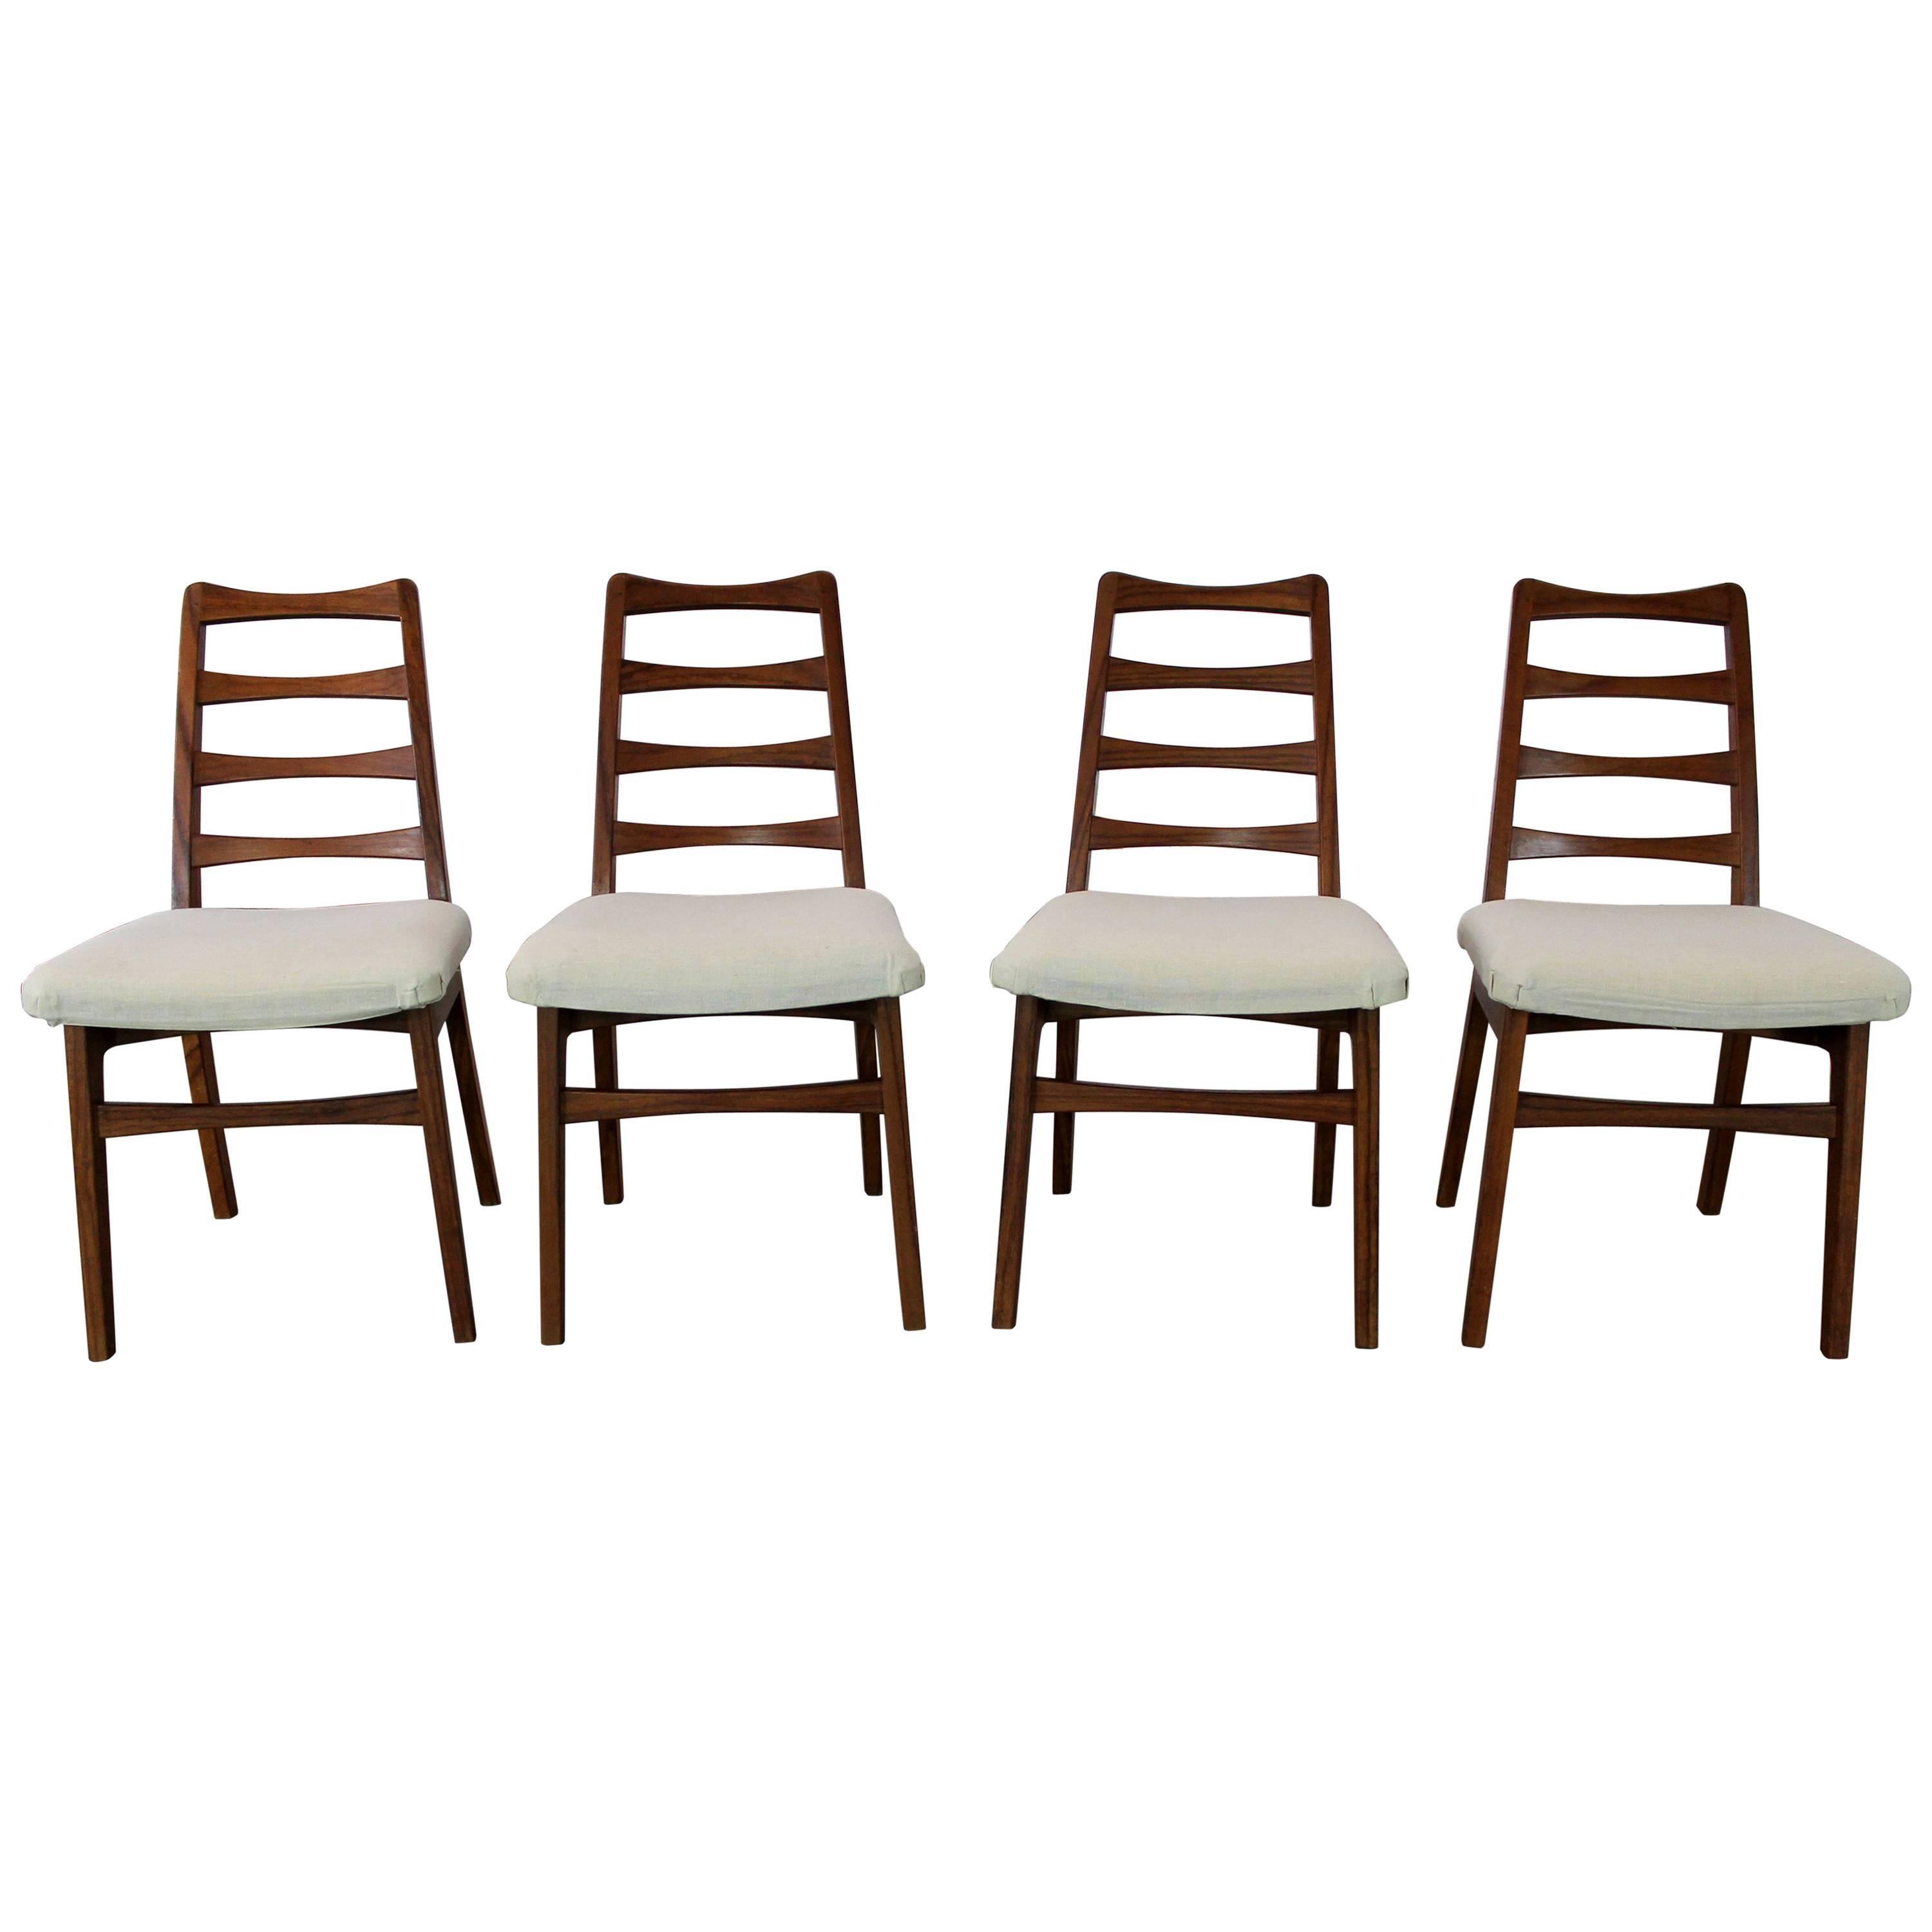 Rosewood Ladderback Dining Chairs Vintage Mid-Century Modern Set of Four